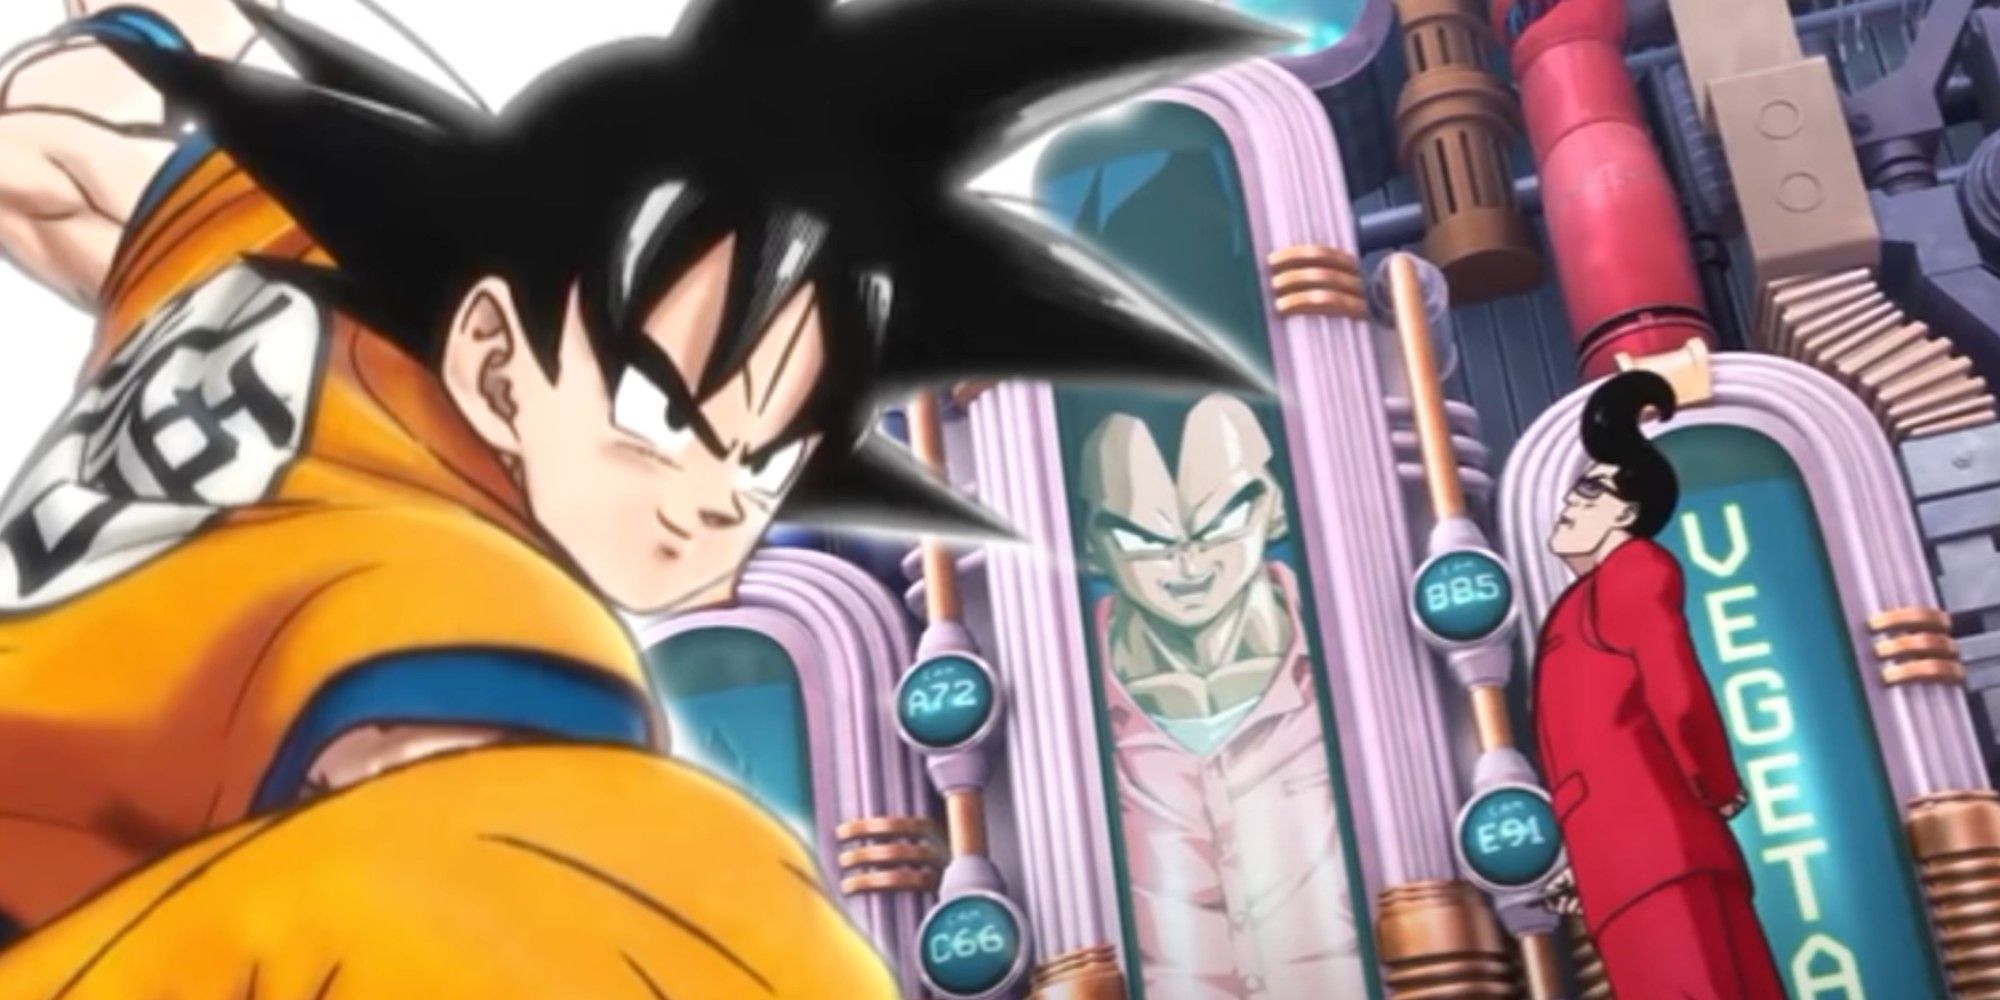 UnrealEntGaming on X: Be that as it may, despite how one may feel about  the Dragon Ball Super: Super Hero Movie, I feel as though (to me at least  on my own